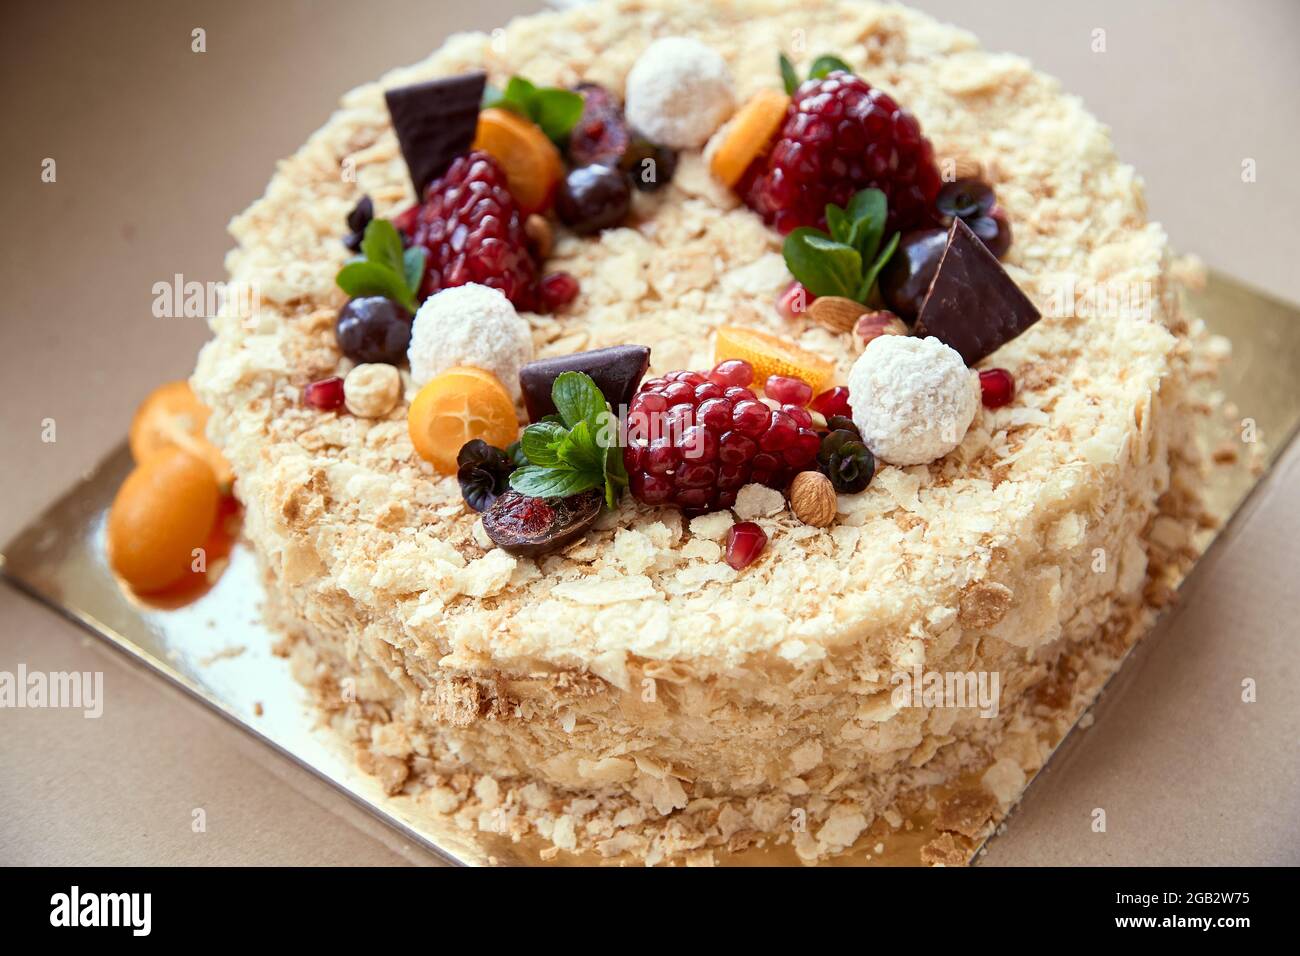 Birthday cake. Garnished with fruits, berries and chocolate. Festive mood. High quality photo Stock Photo